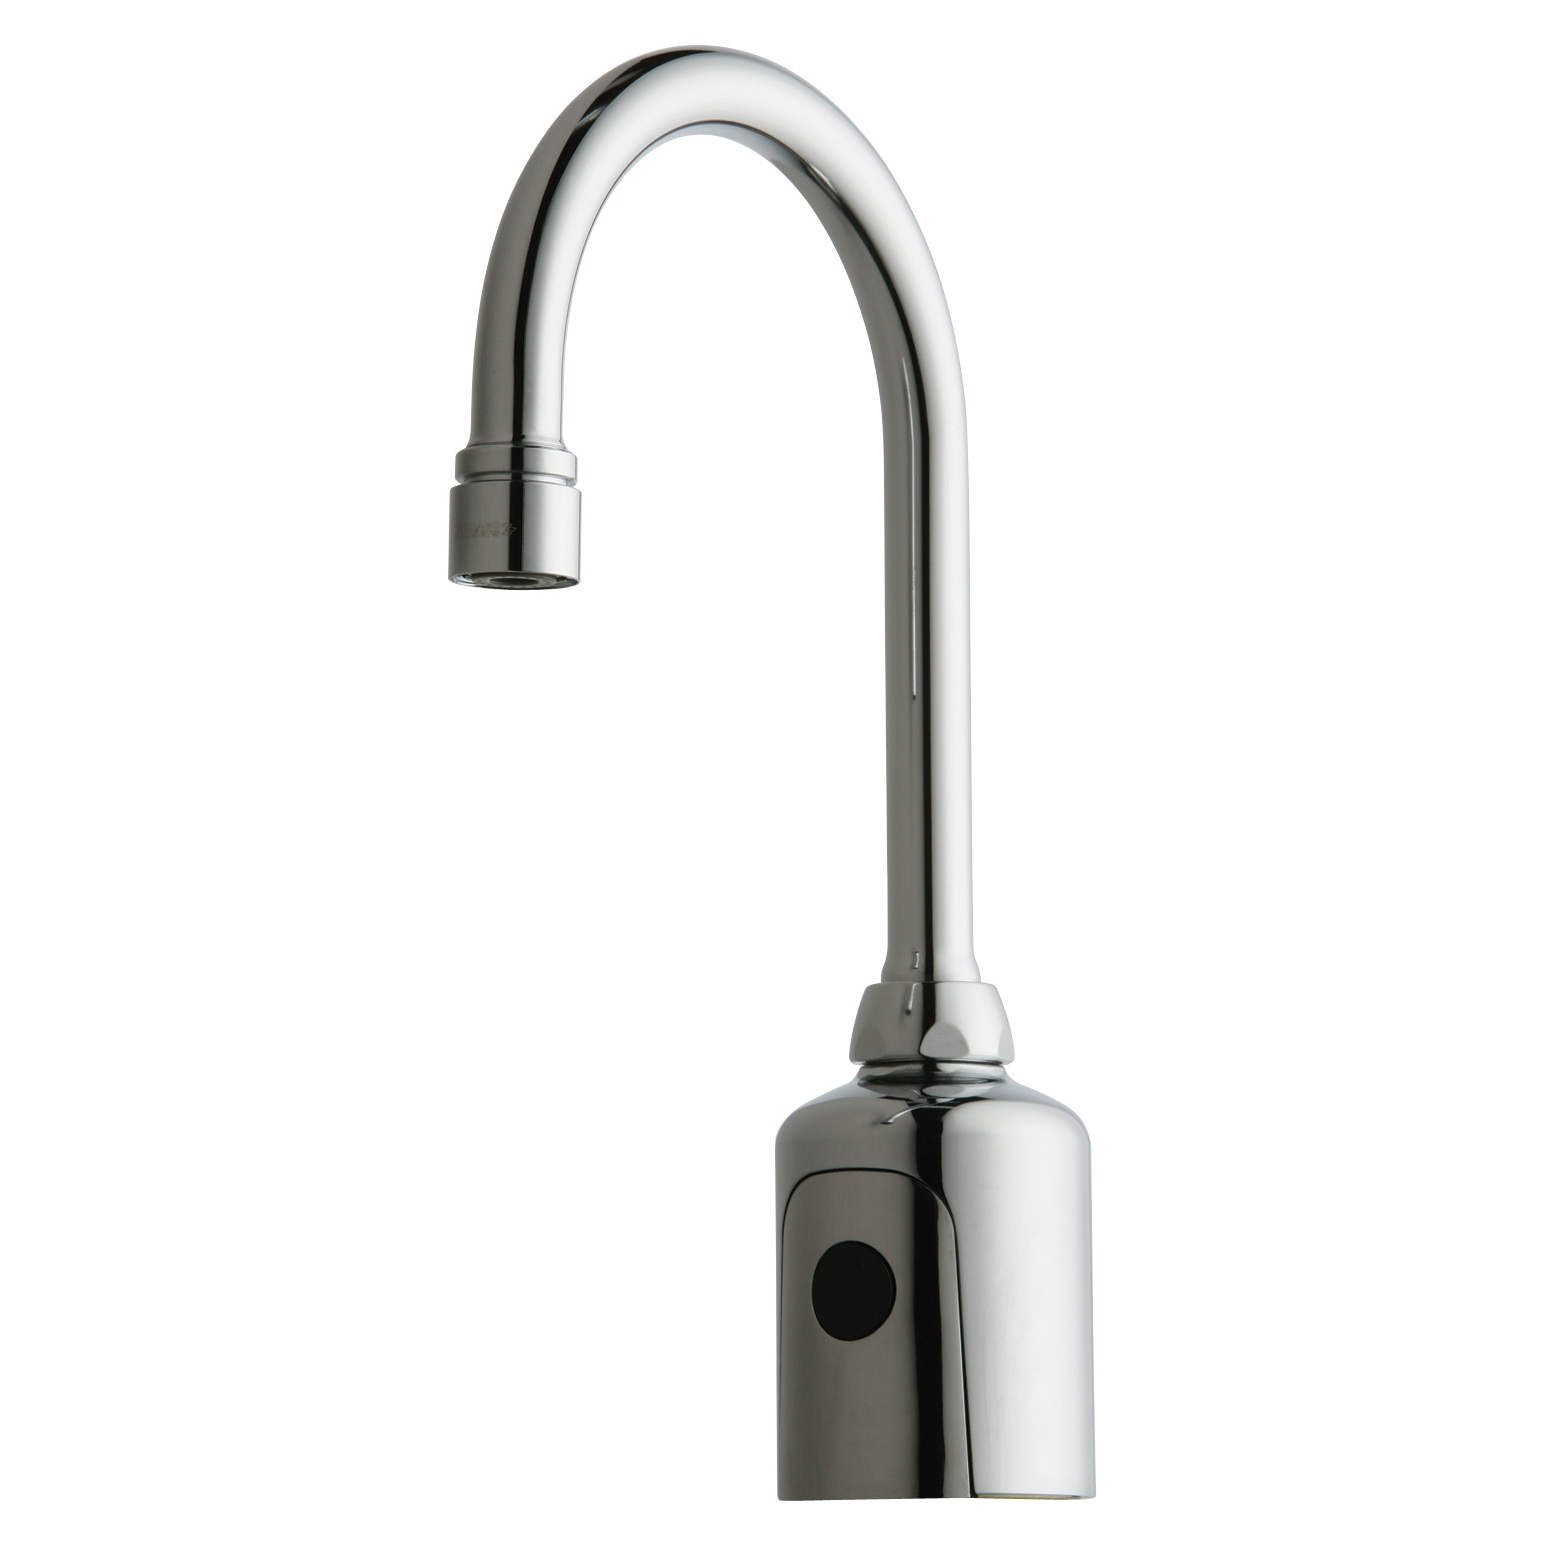 Electronic Metering Faucet In Chrome